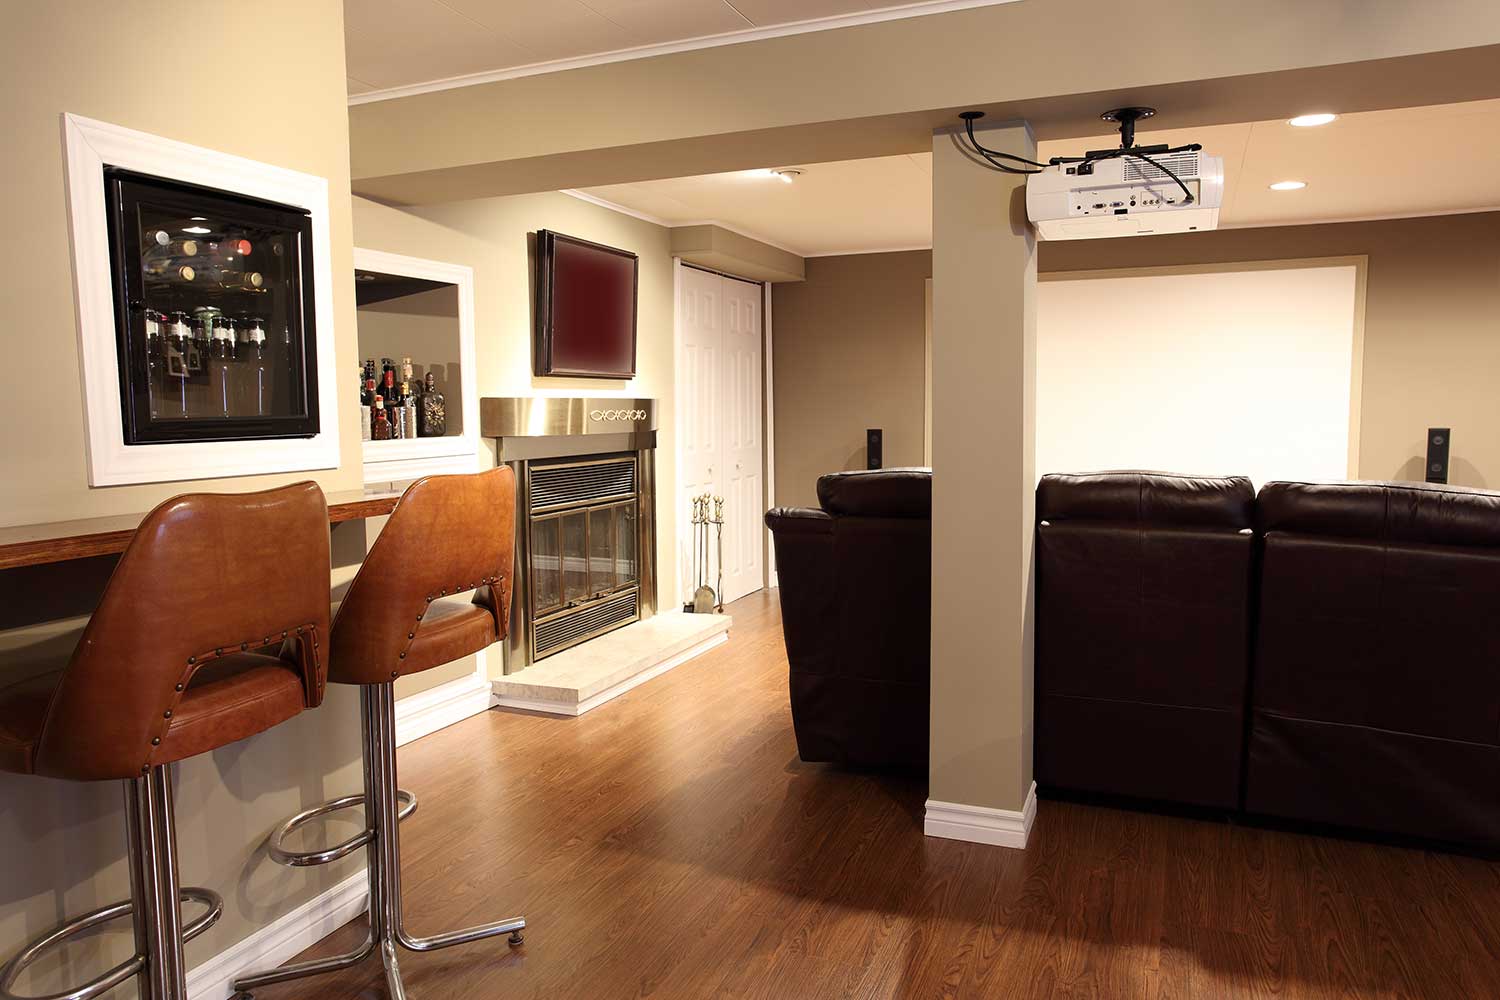 Modern living room located in the basement of a bungalow with a wooden floor, a bar, mini fridge and furniture